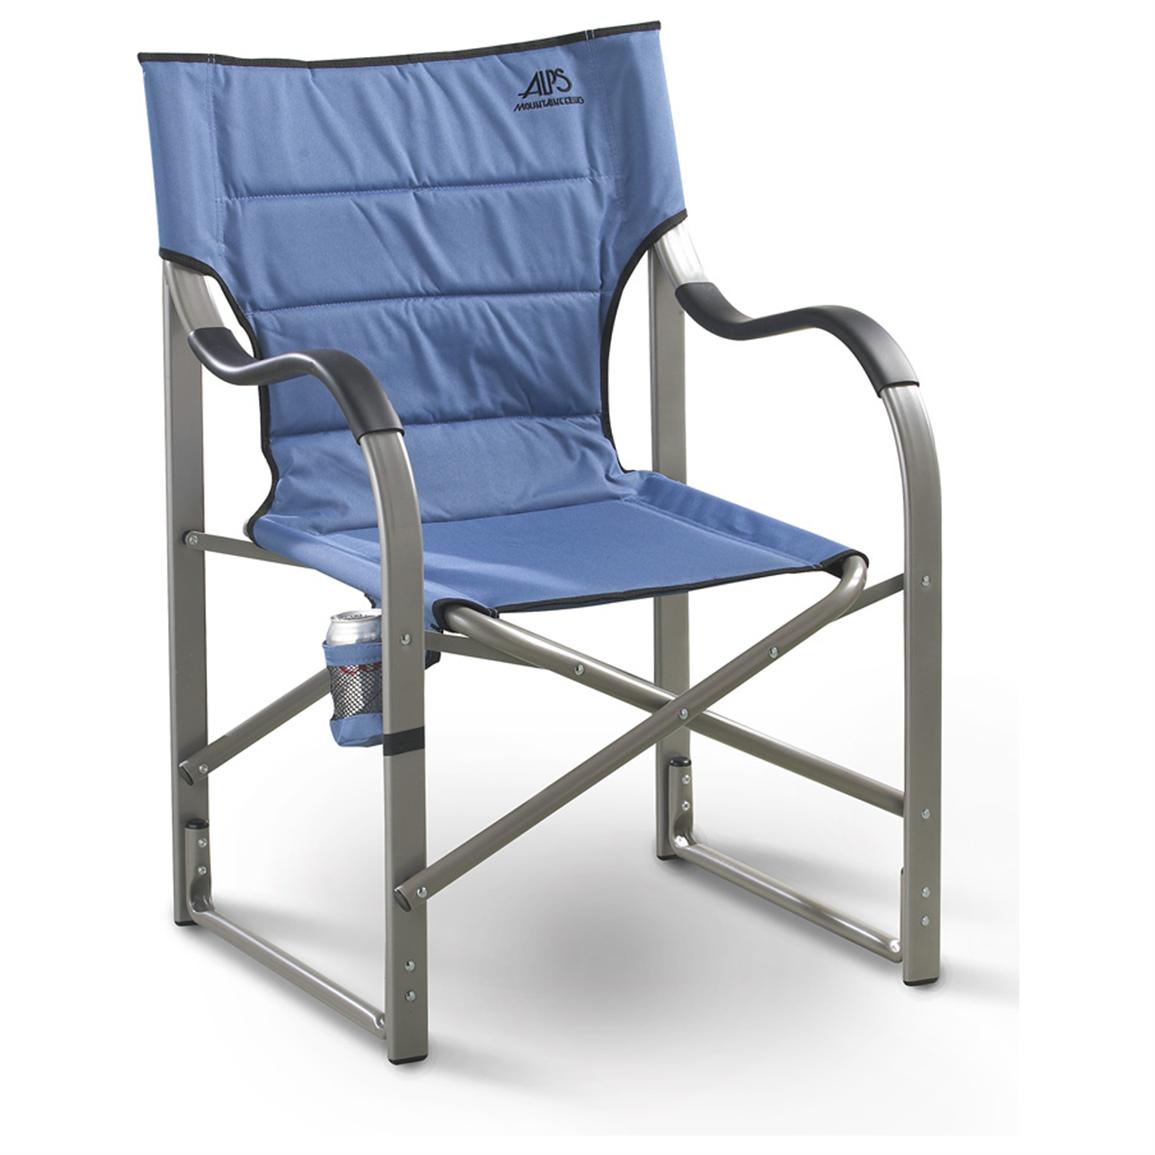 alps mountaineering oversized camping chair EGEGTHL